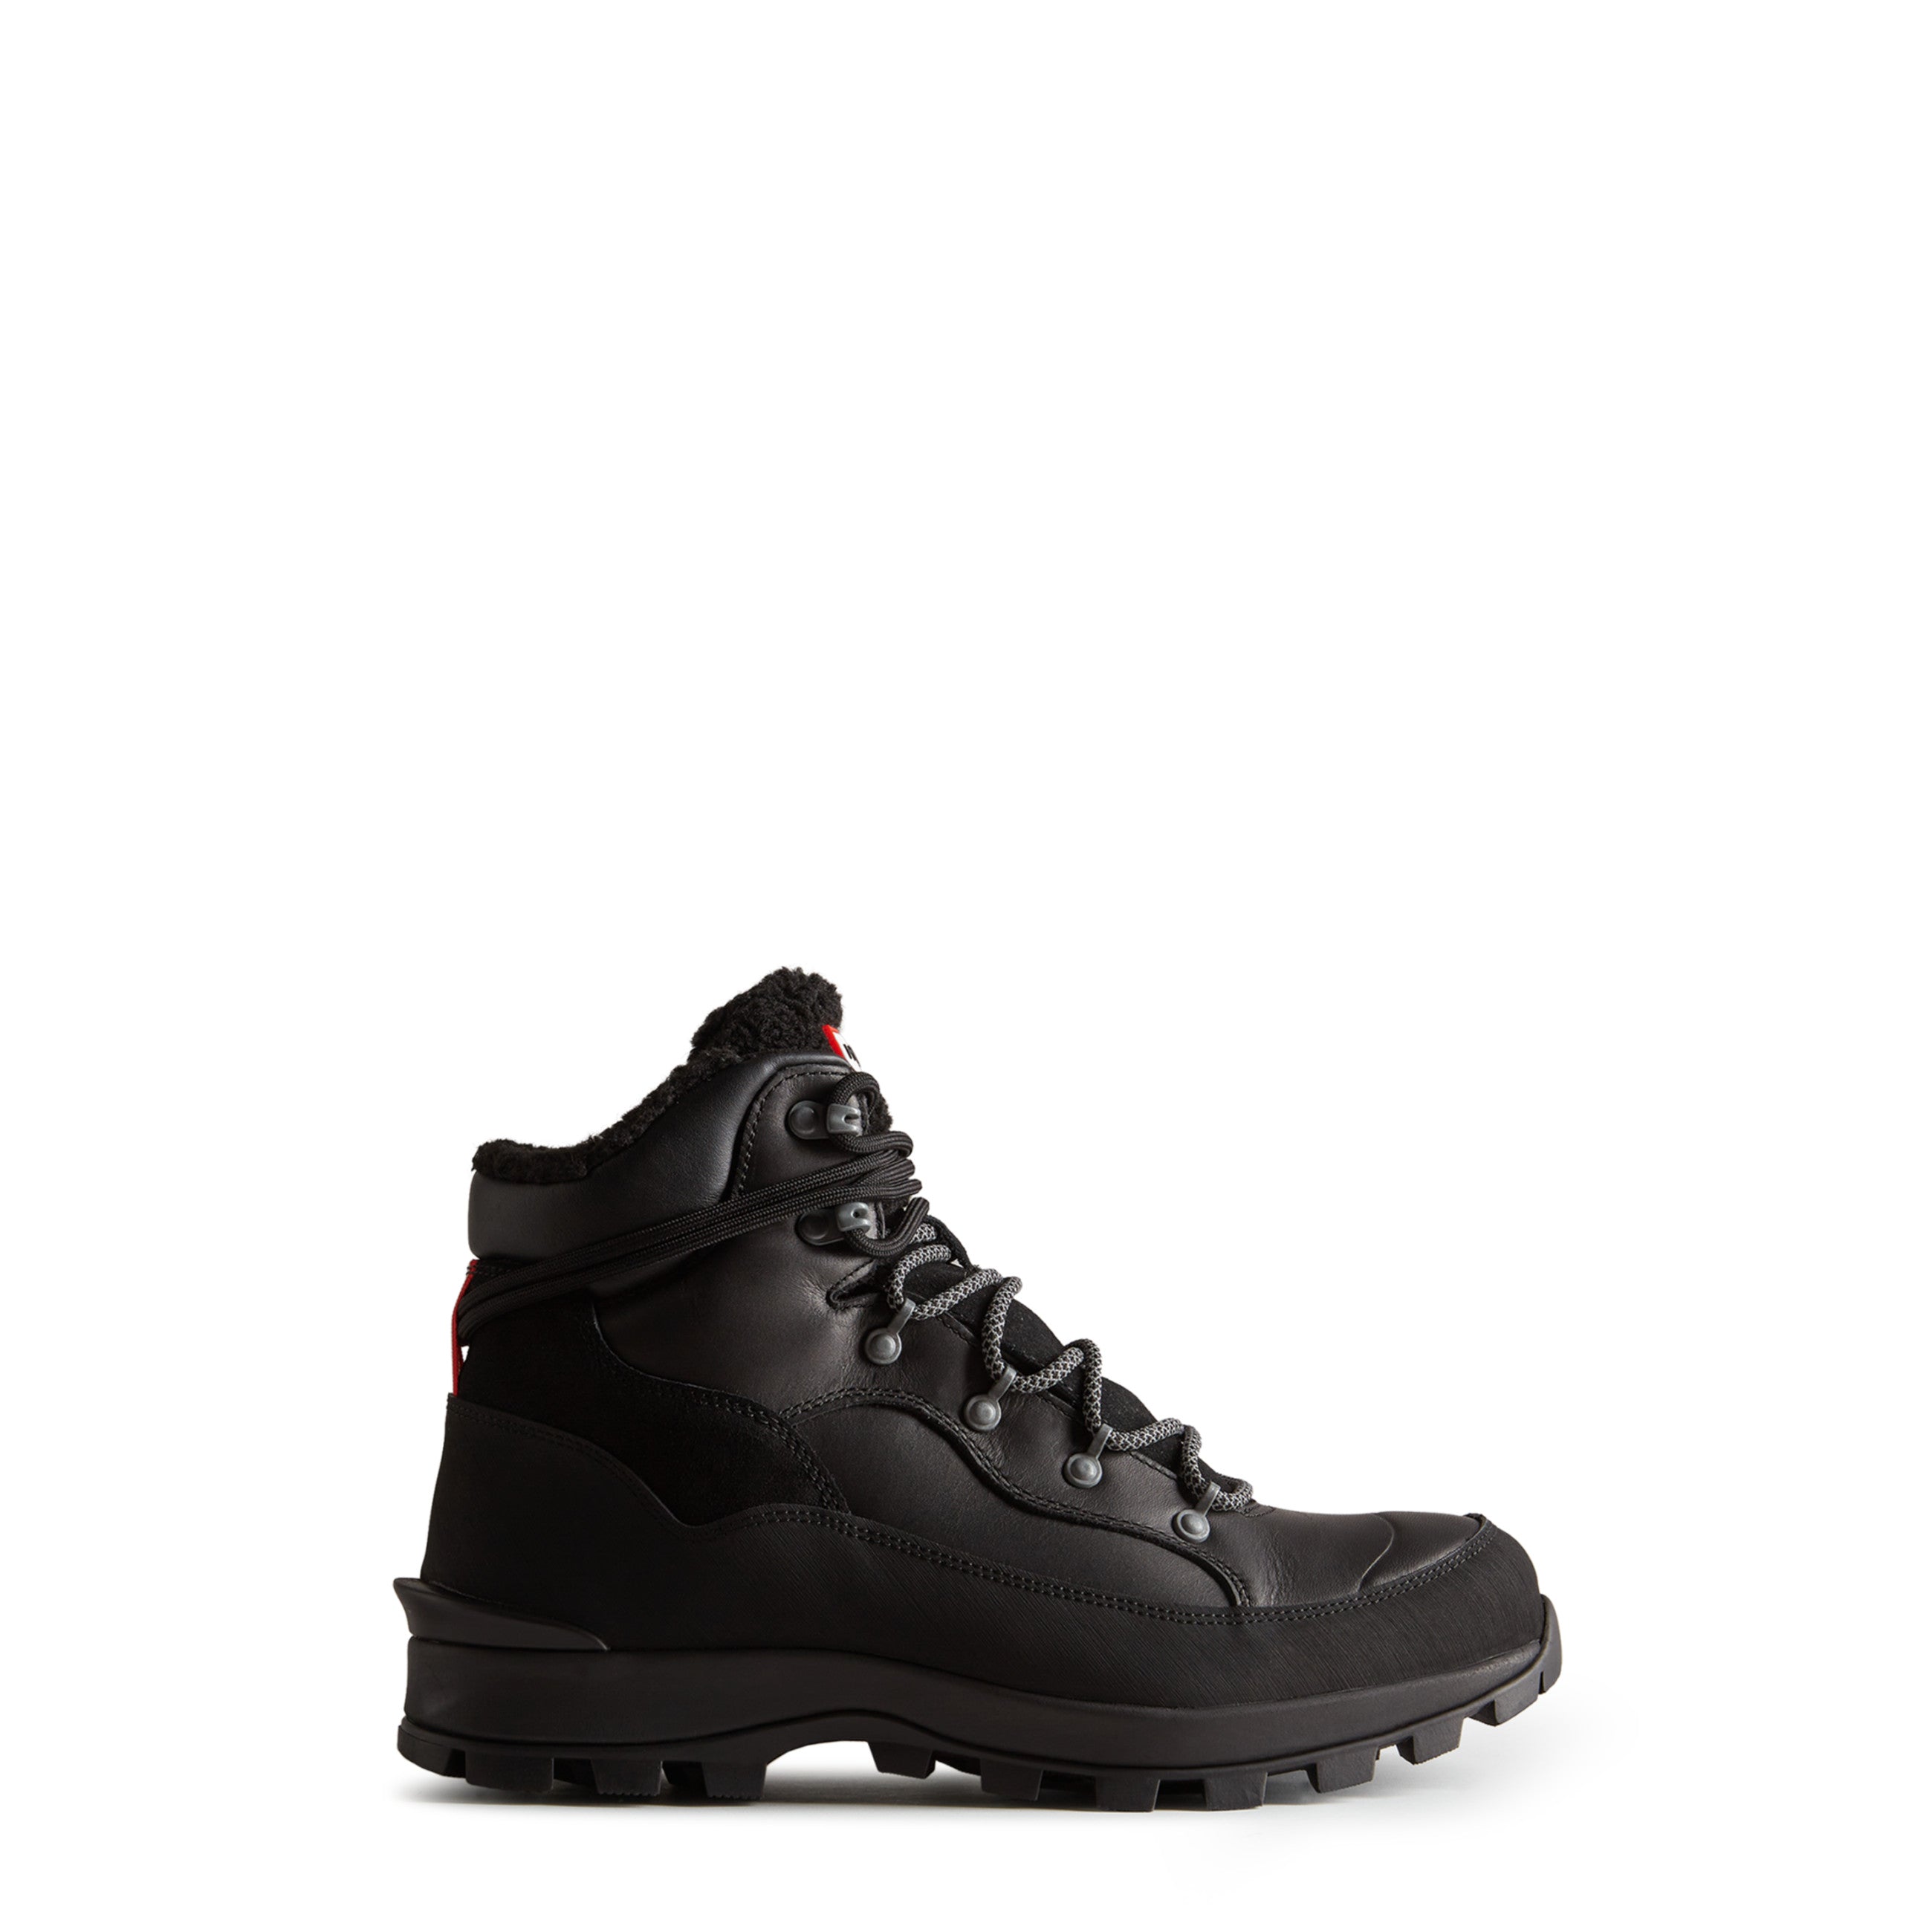 Men's Explorer Insulated Leather Lace-Up Commando Boots